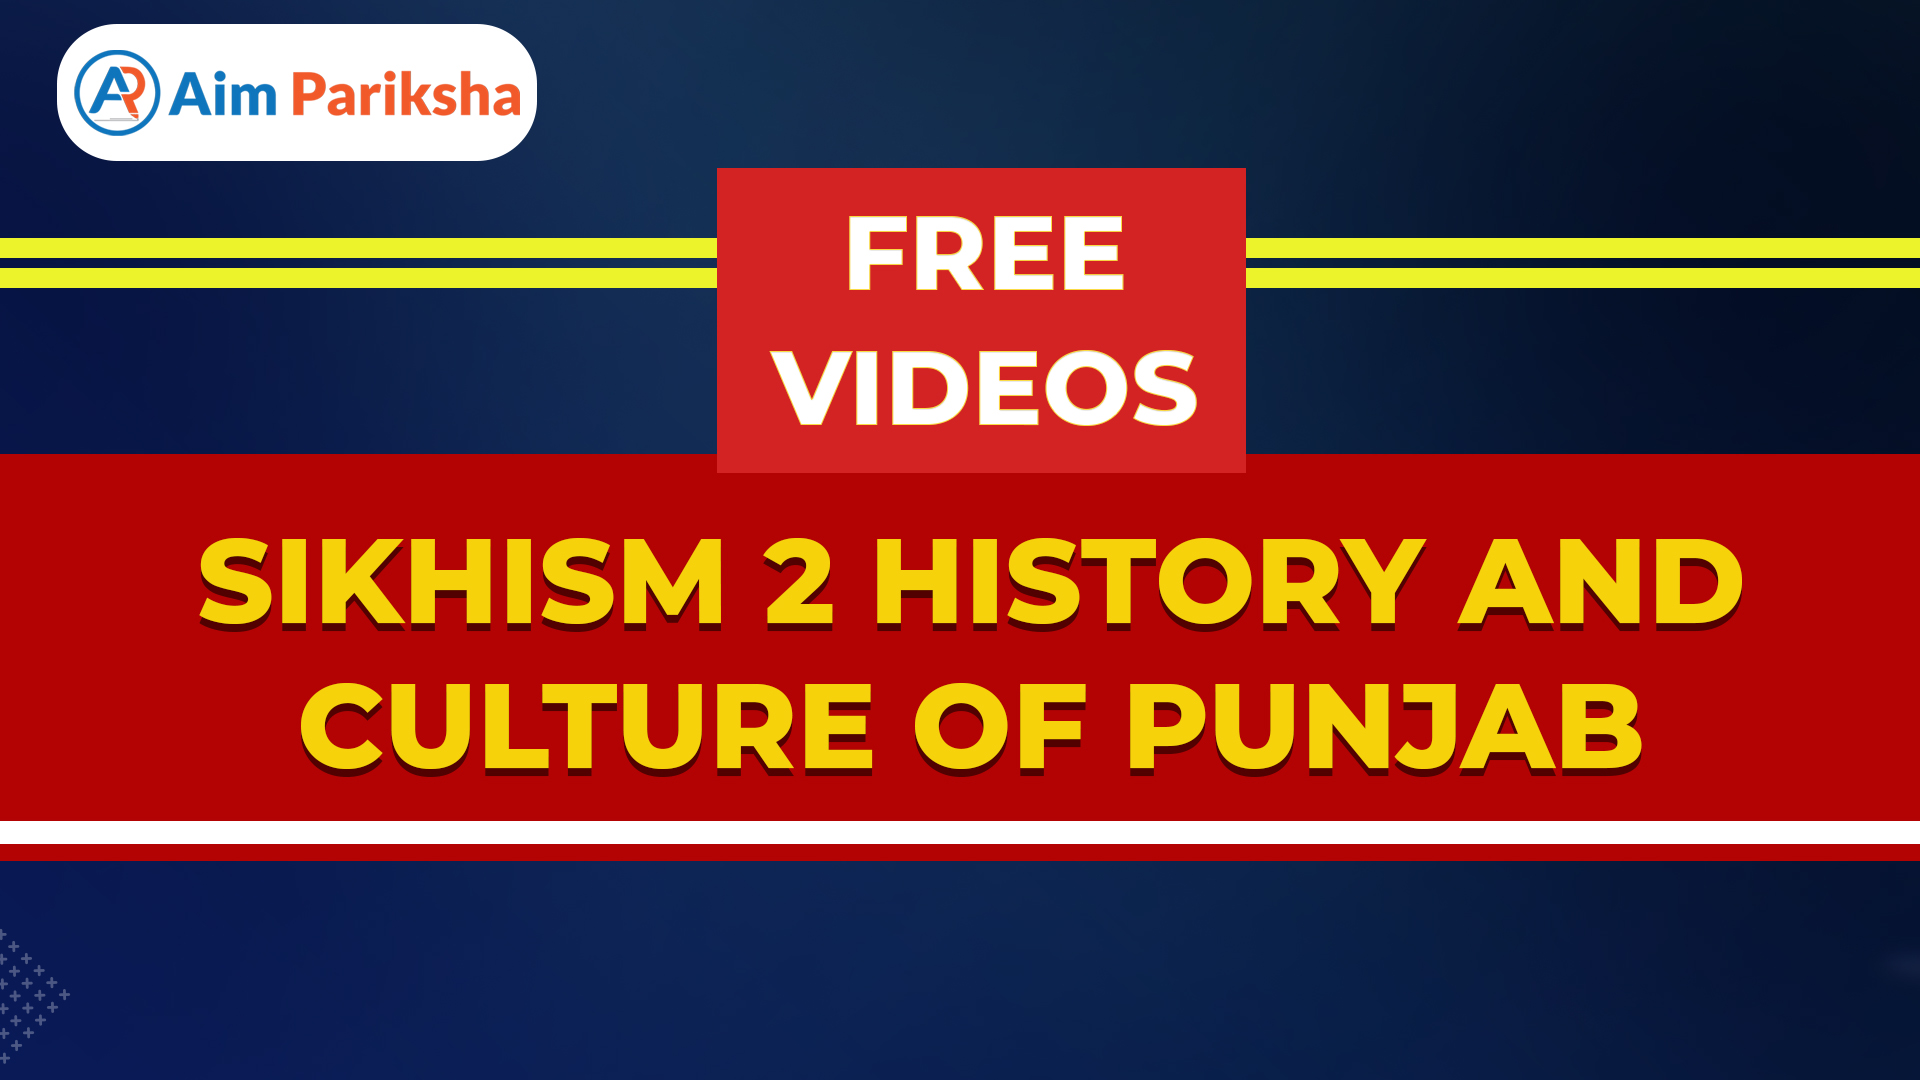 SIKHISM-2 HISTORY AND CULTURE OF PUNJAB